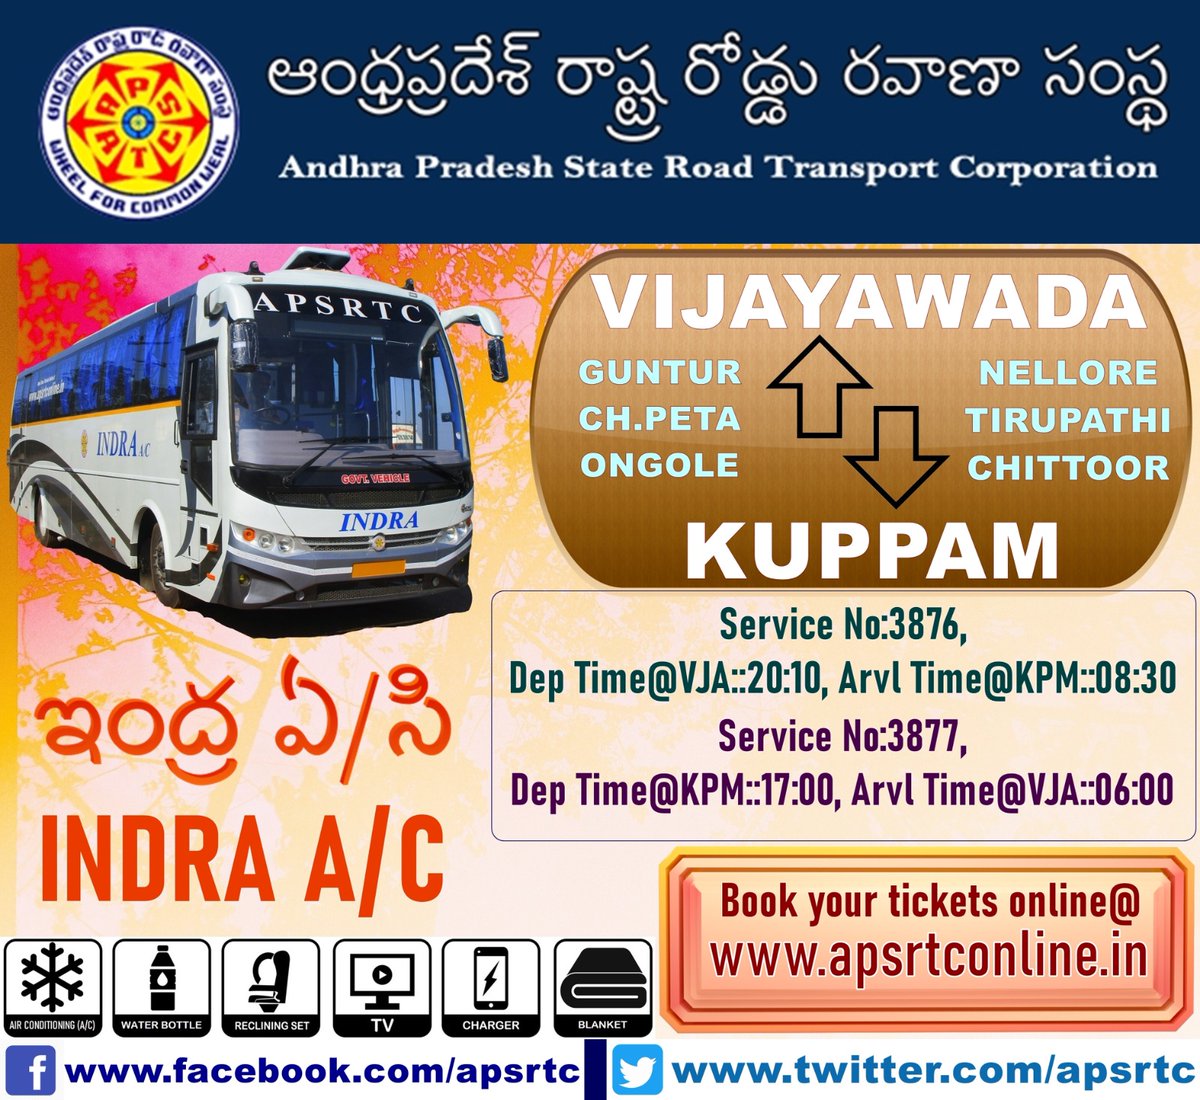 APSRTC is Operating INDRA A/C Services for VIJAYAWADA-KUPPAM

For Bookings Please Visit
apsrtconline.in